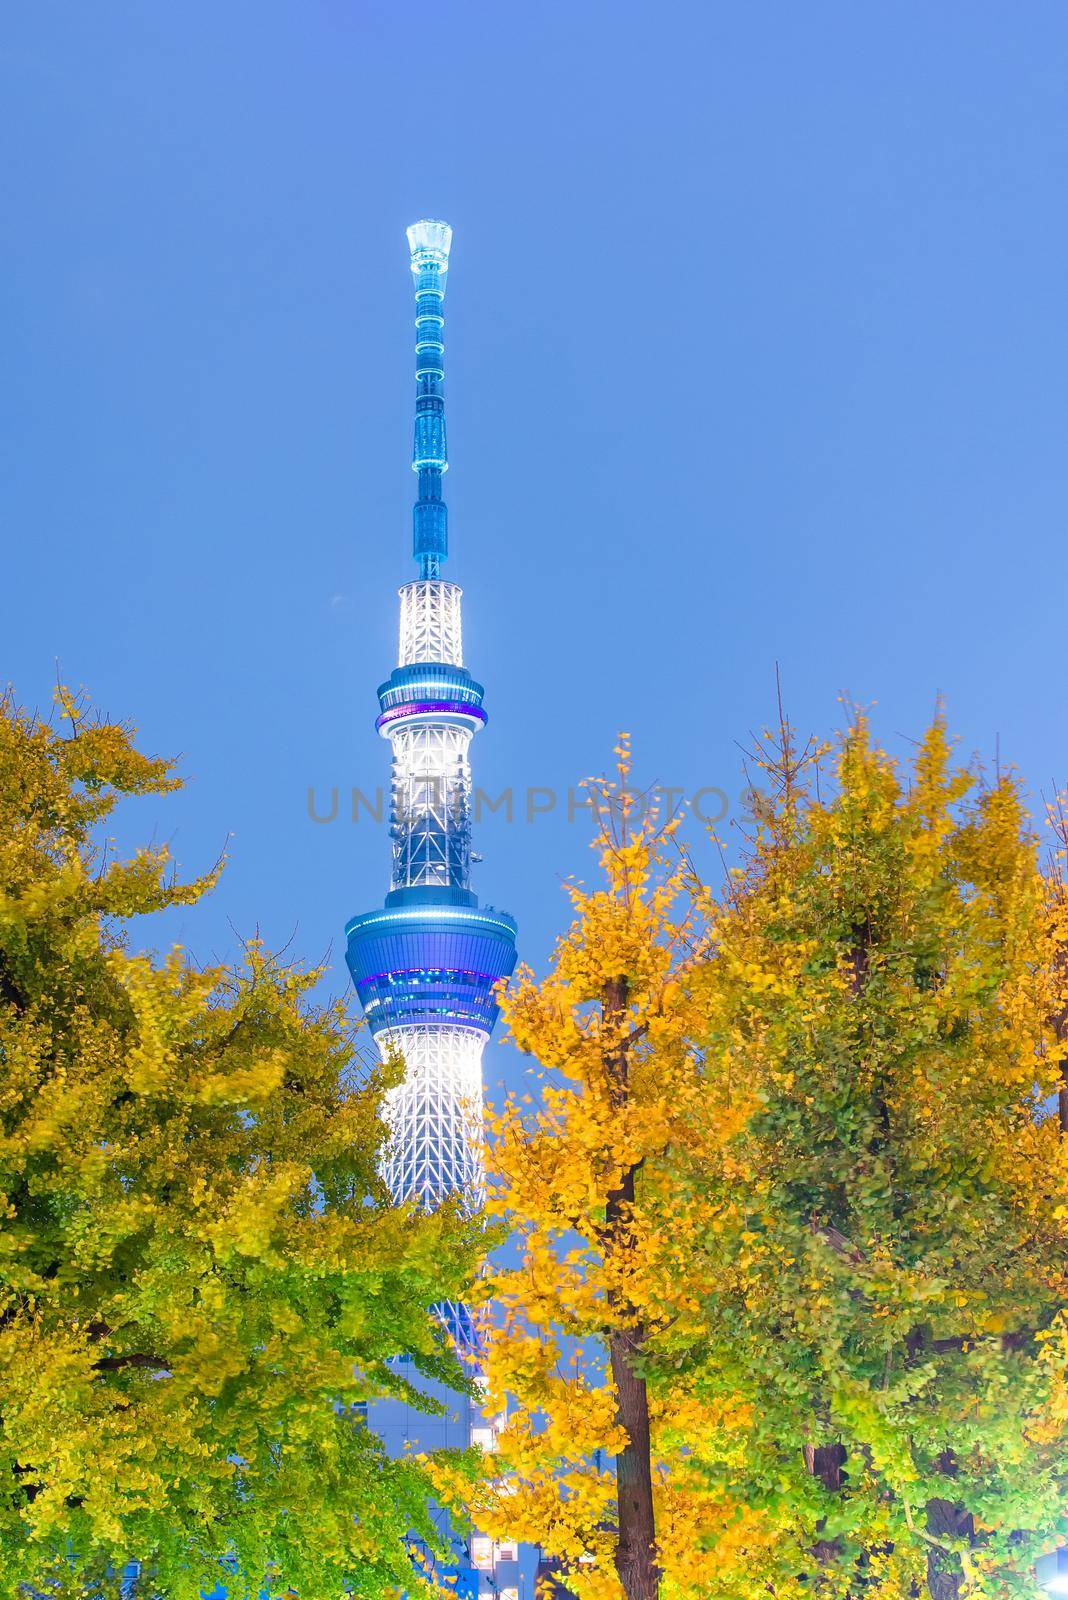 The Tokyo Skytree a new television broadcasting tower and landmark of Tokyo at night in Japan by Nuamfolio